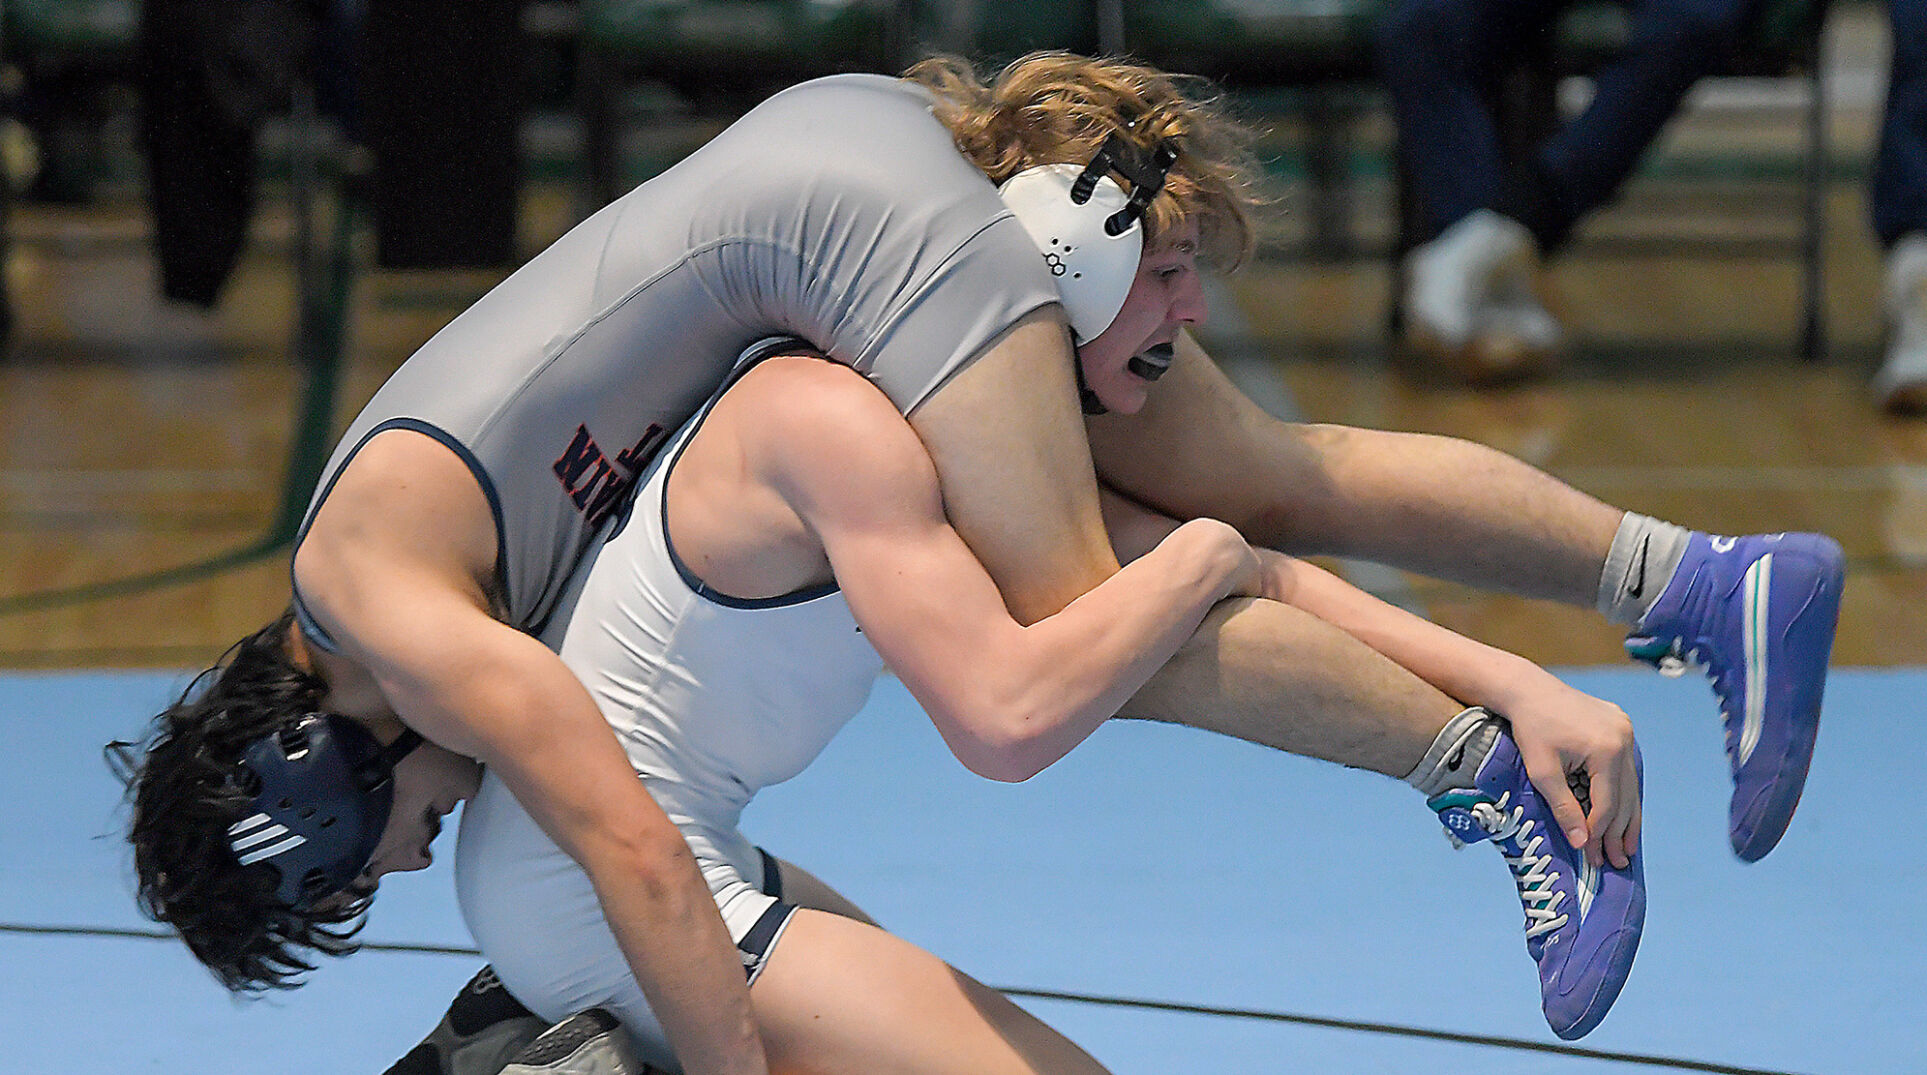 Local Athletes Dominate High School Boys’ Wrestling Tournament with Eight Divisional Titles